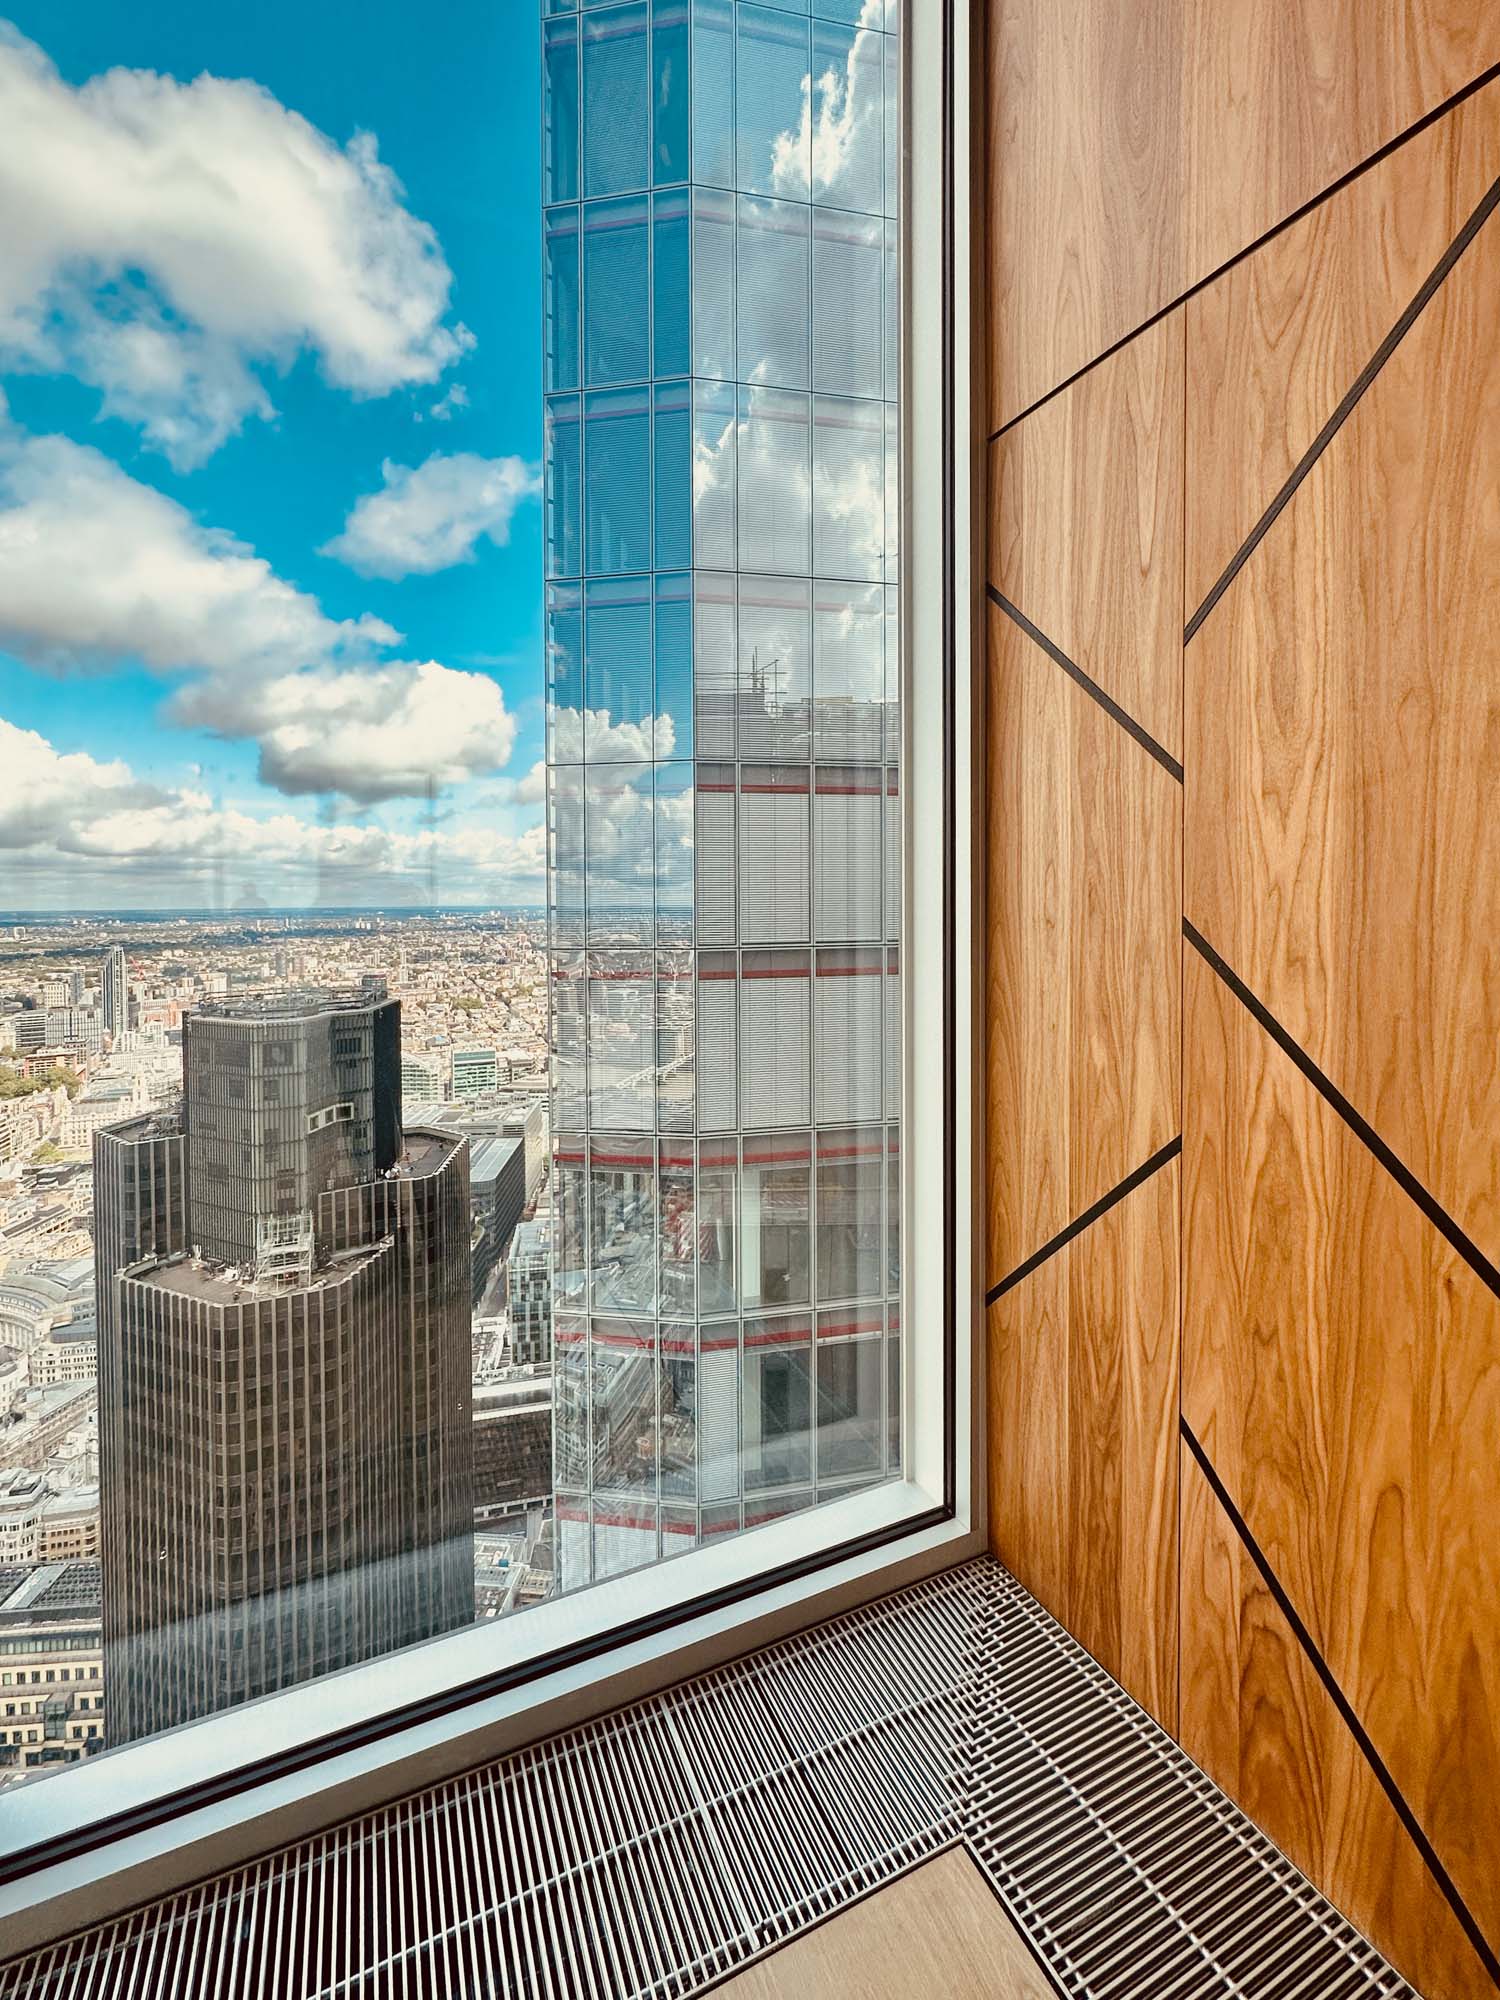 The Lookout public viewing gallery opens at 8 Bishopsgate